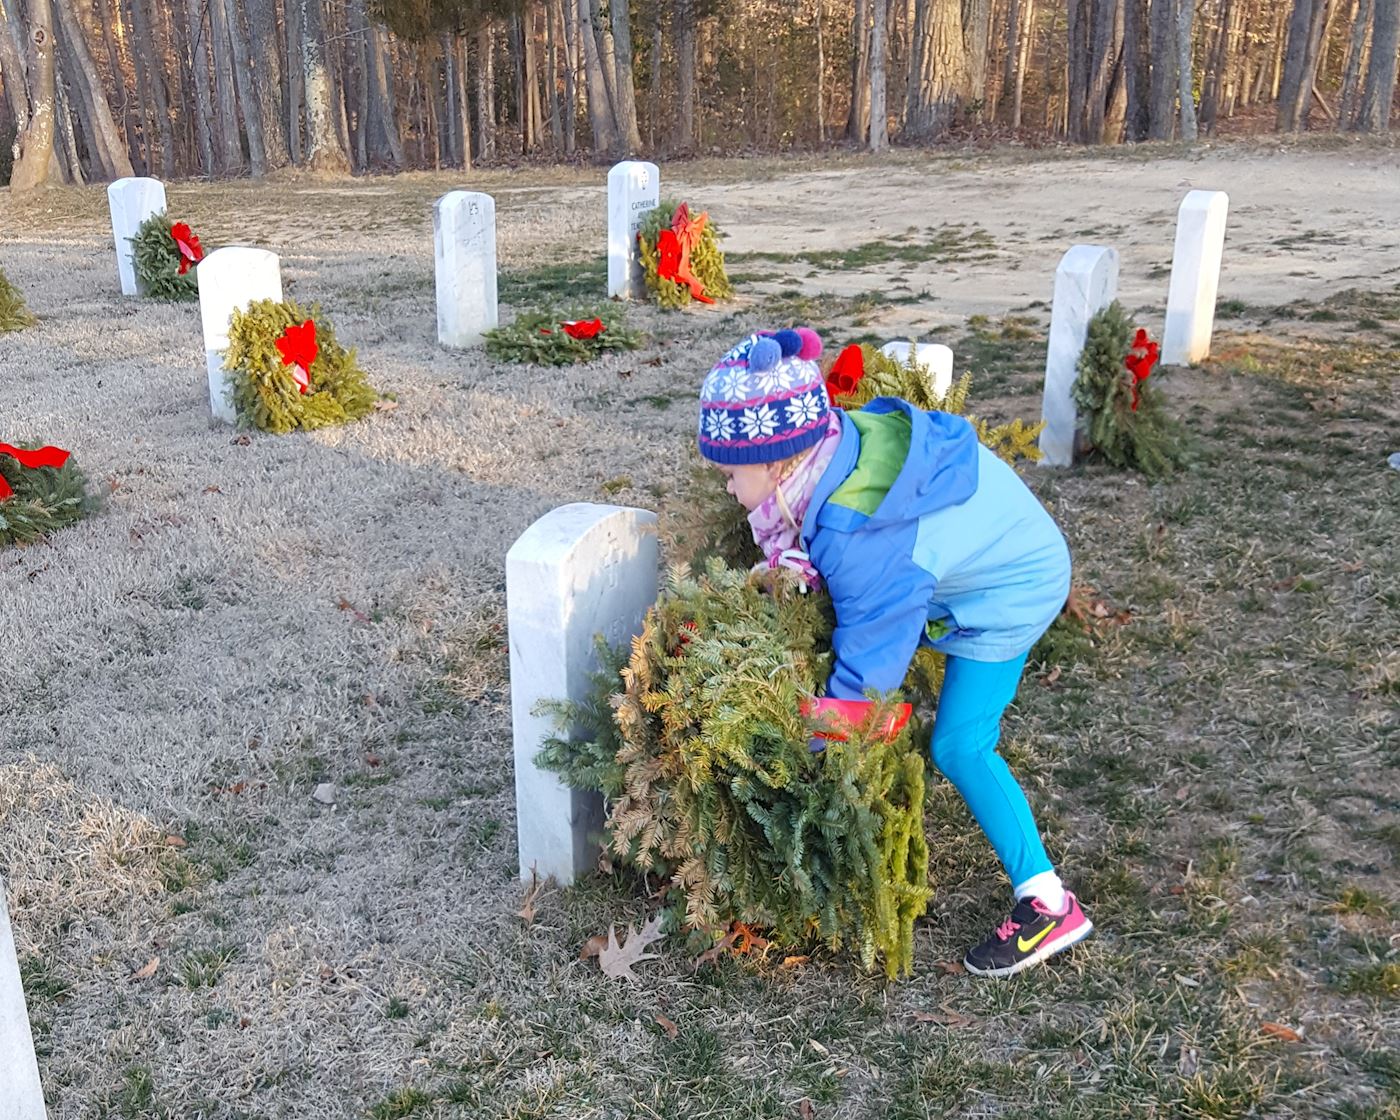 Cleaning up wreaths in 2017